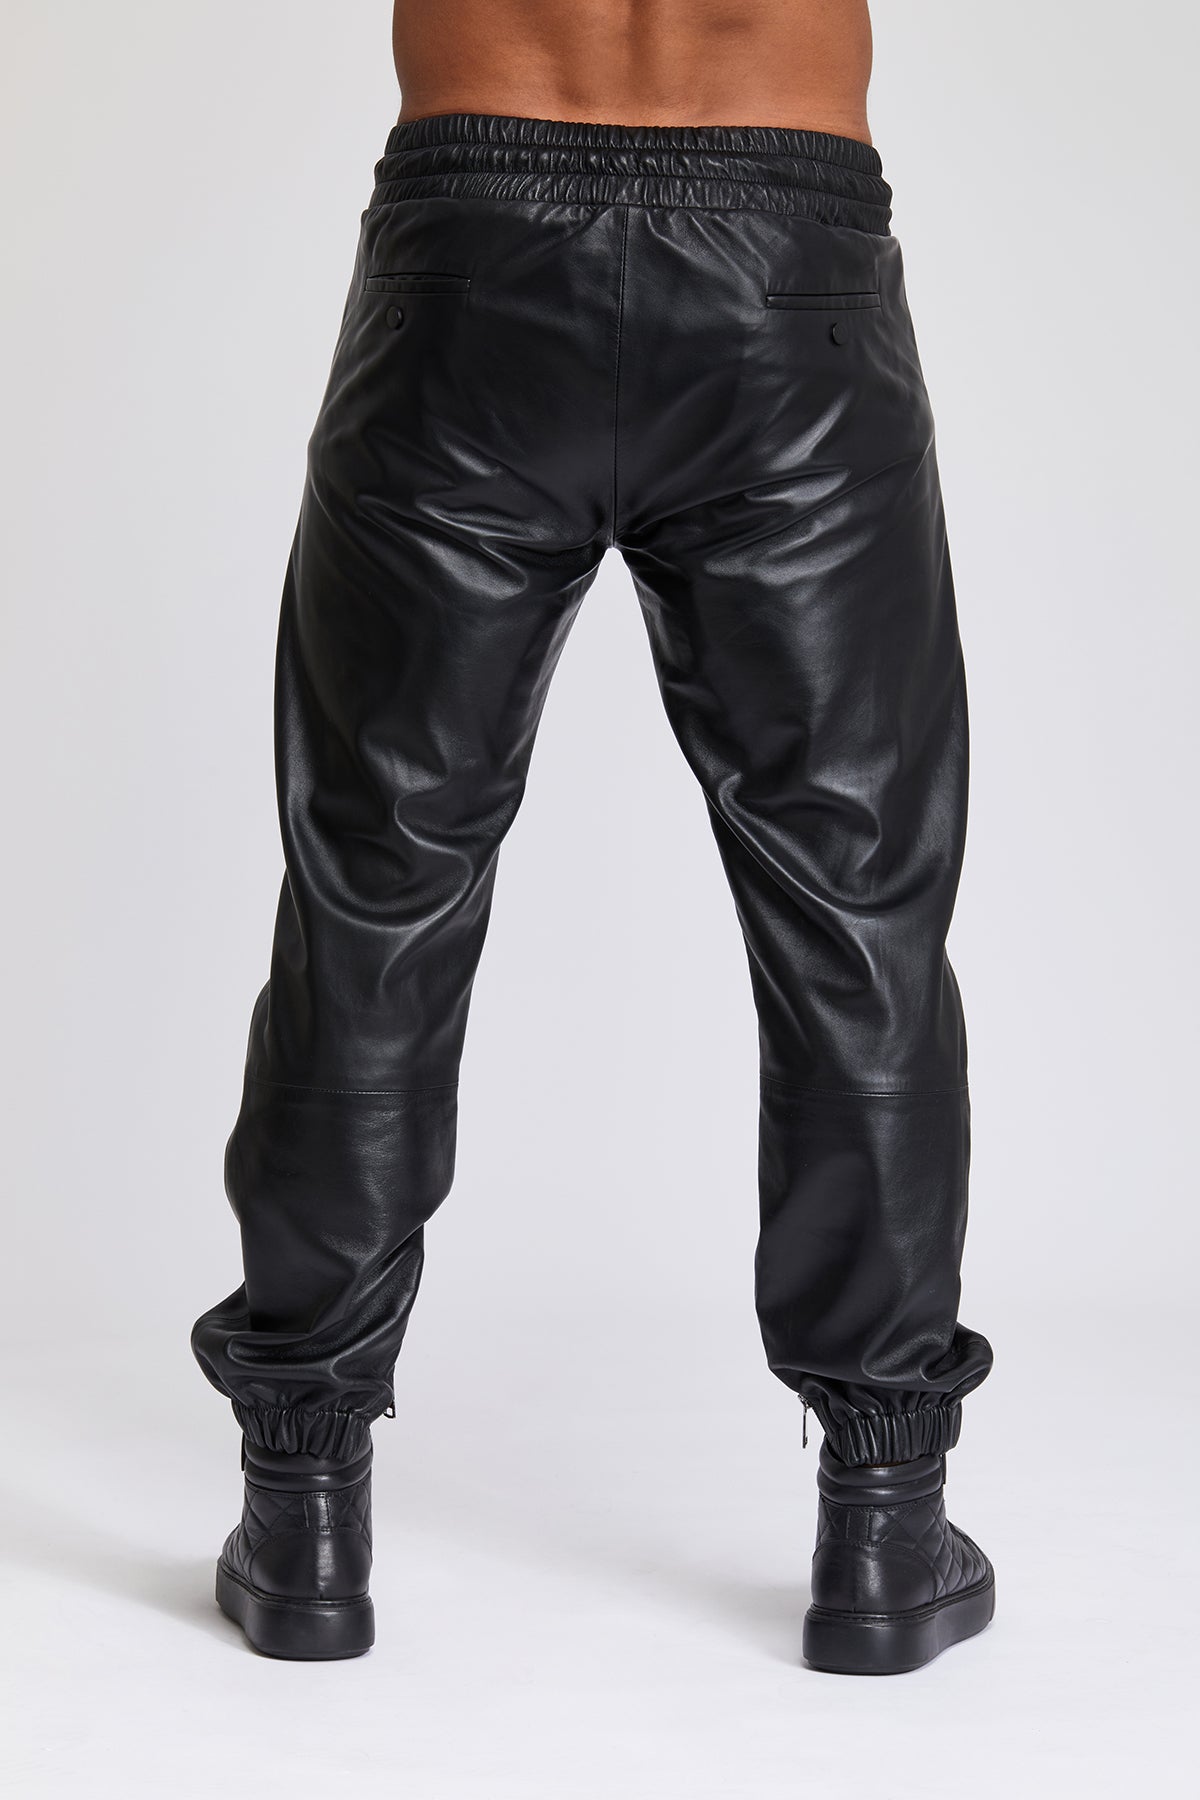 Men's leather pants. 100 % real Turkish leather. Lambskin. Soft. Great ...